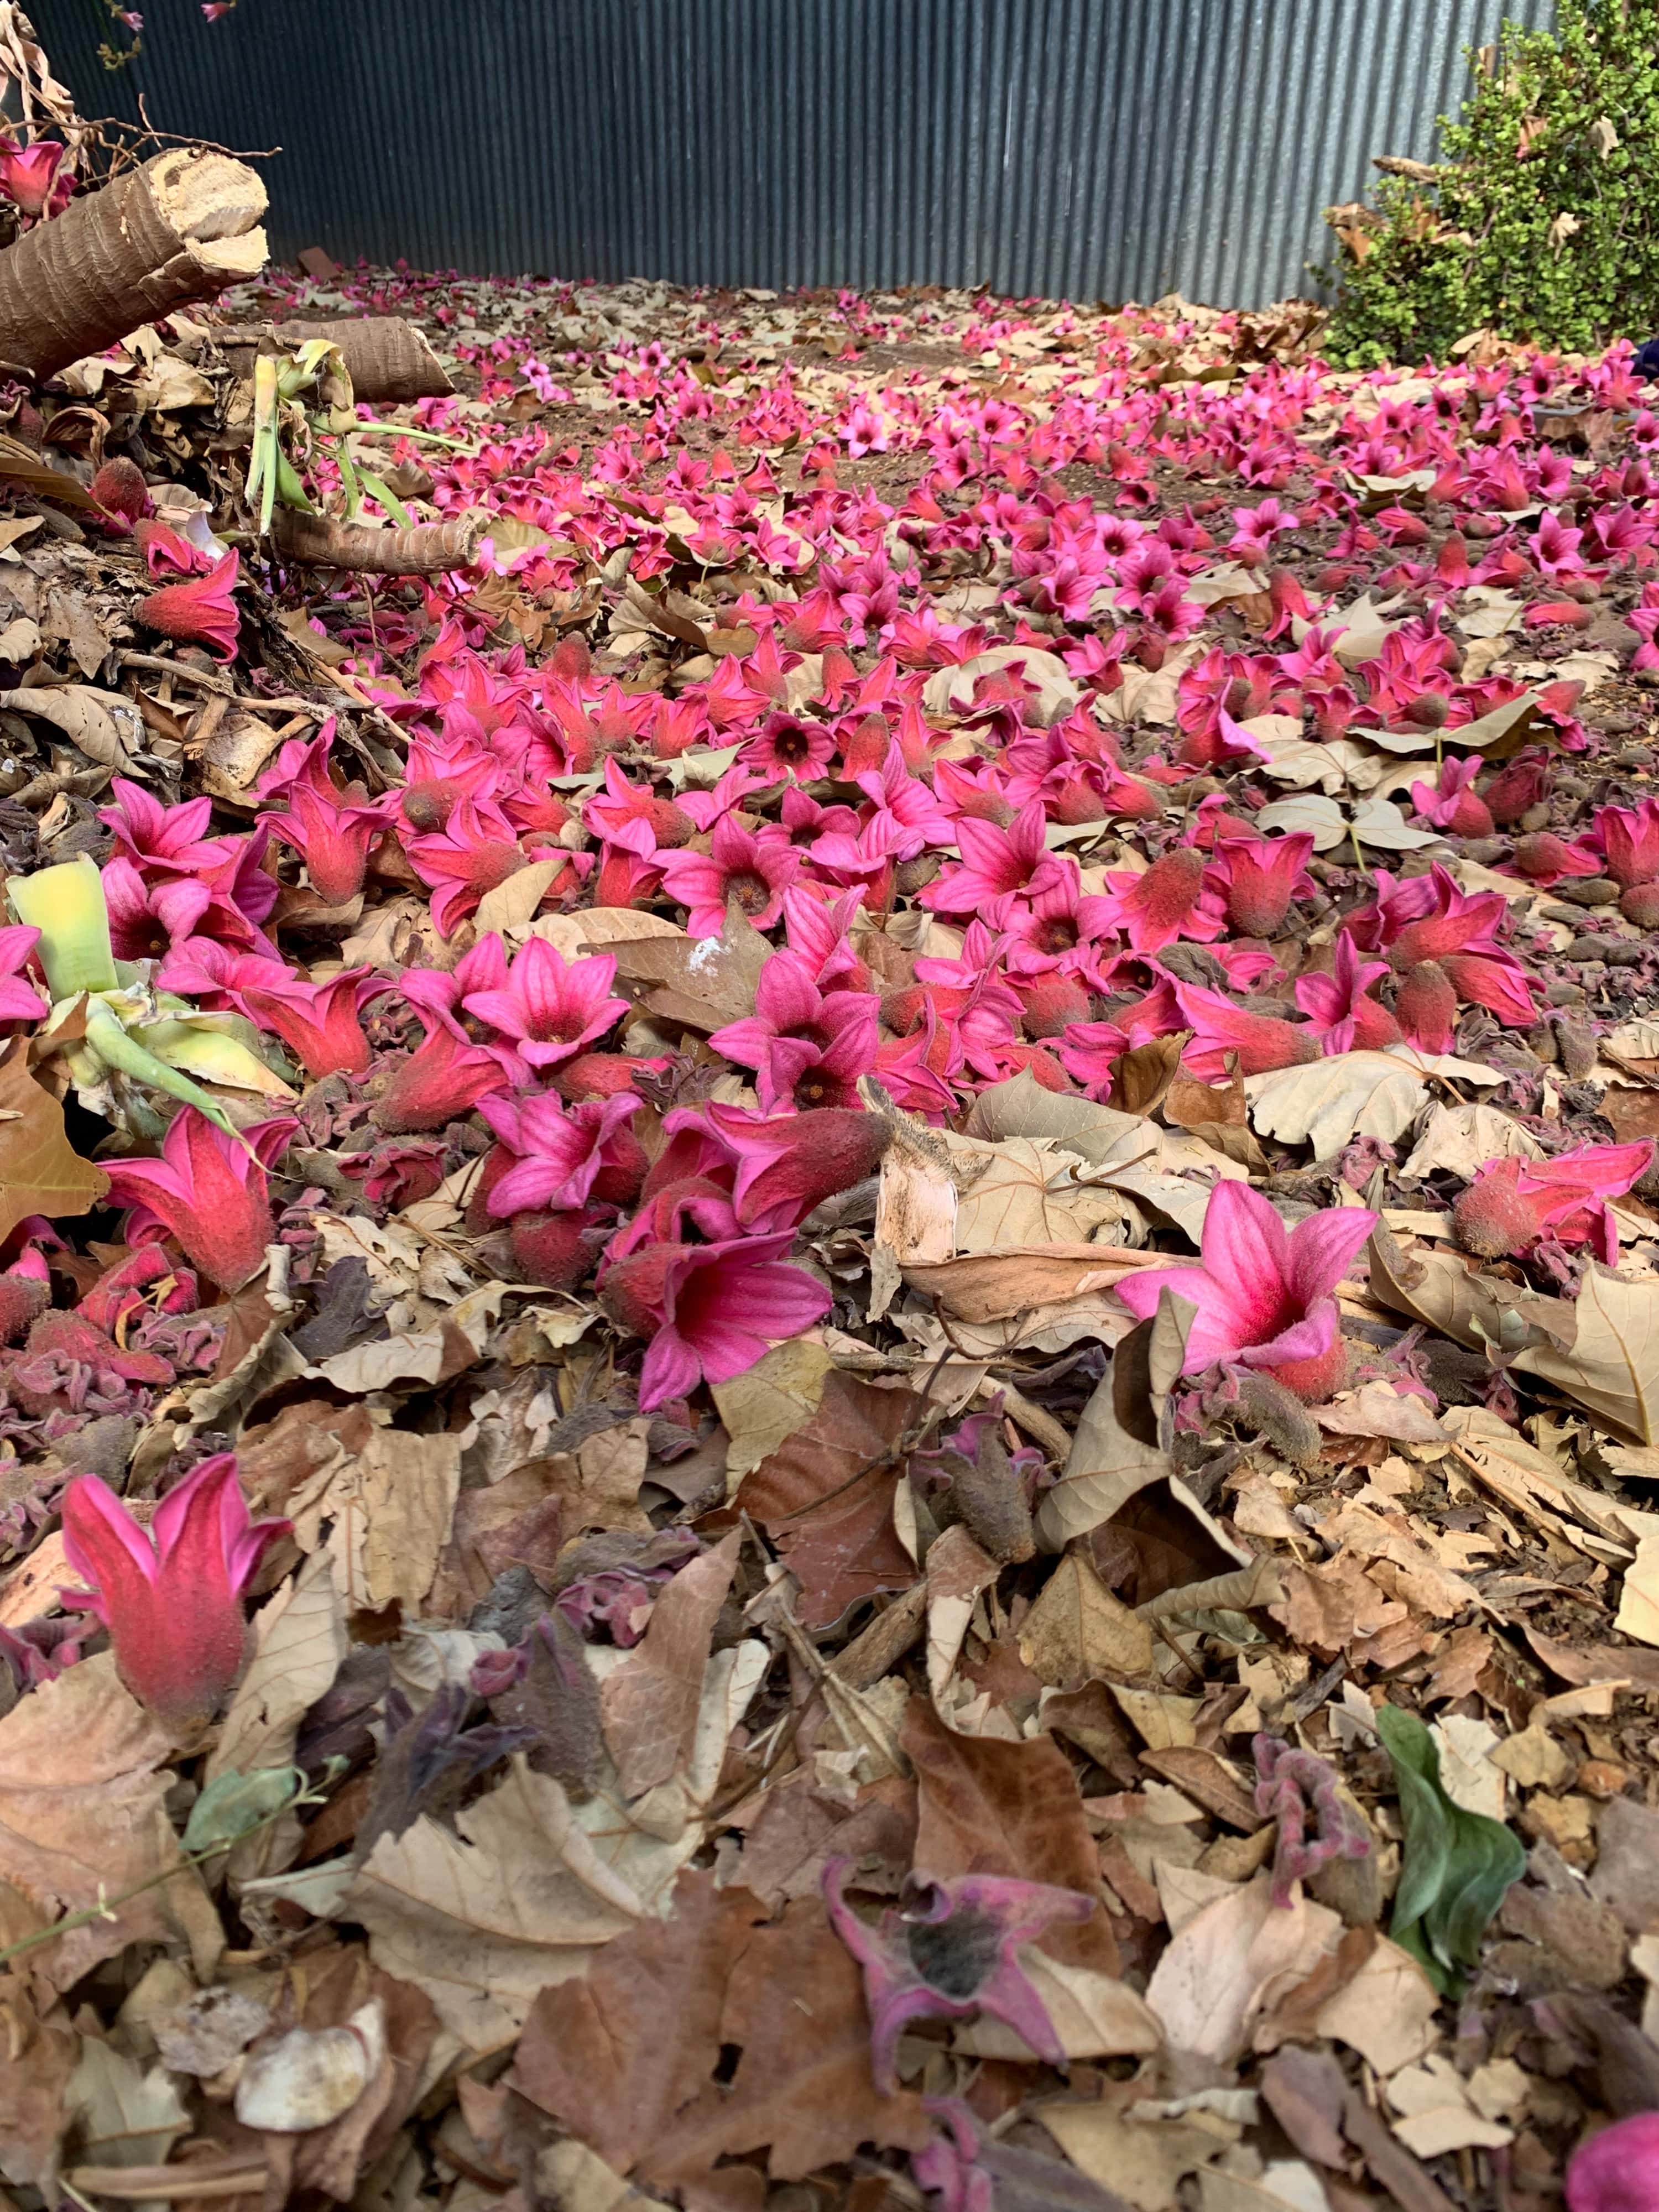 photo of freshly-fallen lacebak flowers on the ground, along with dried leaves